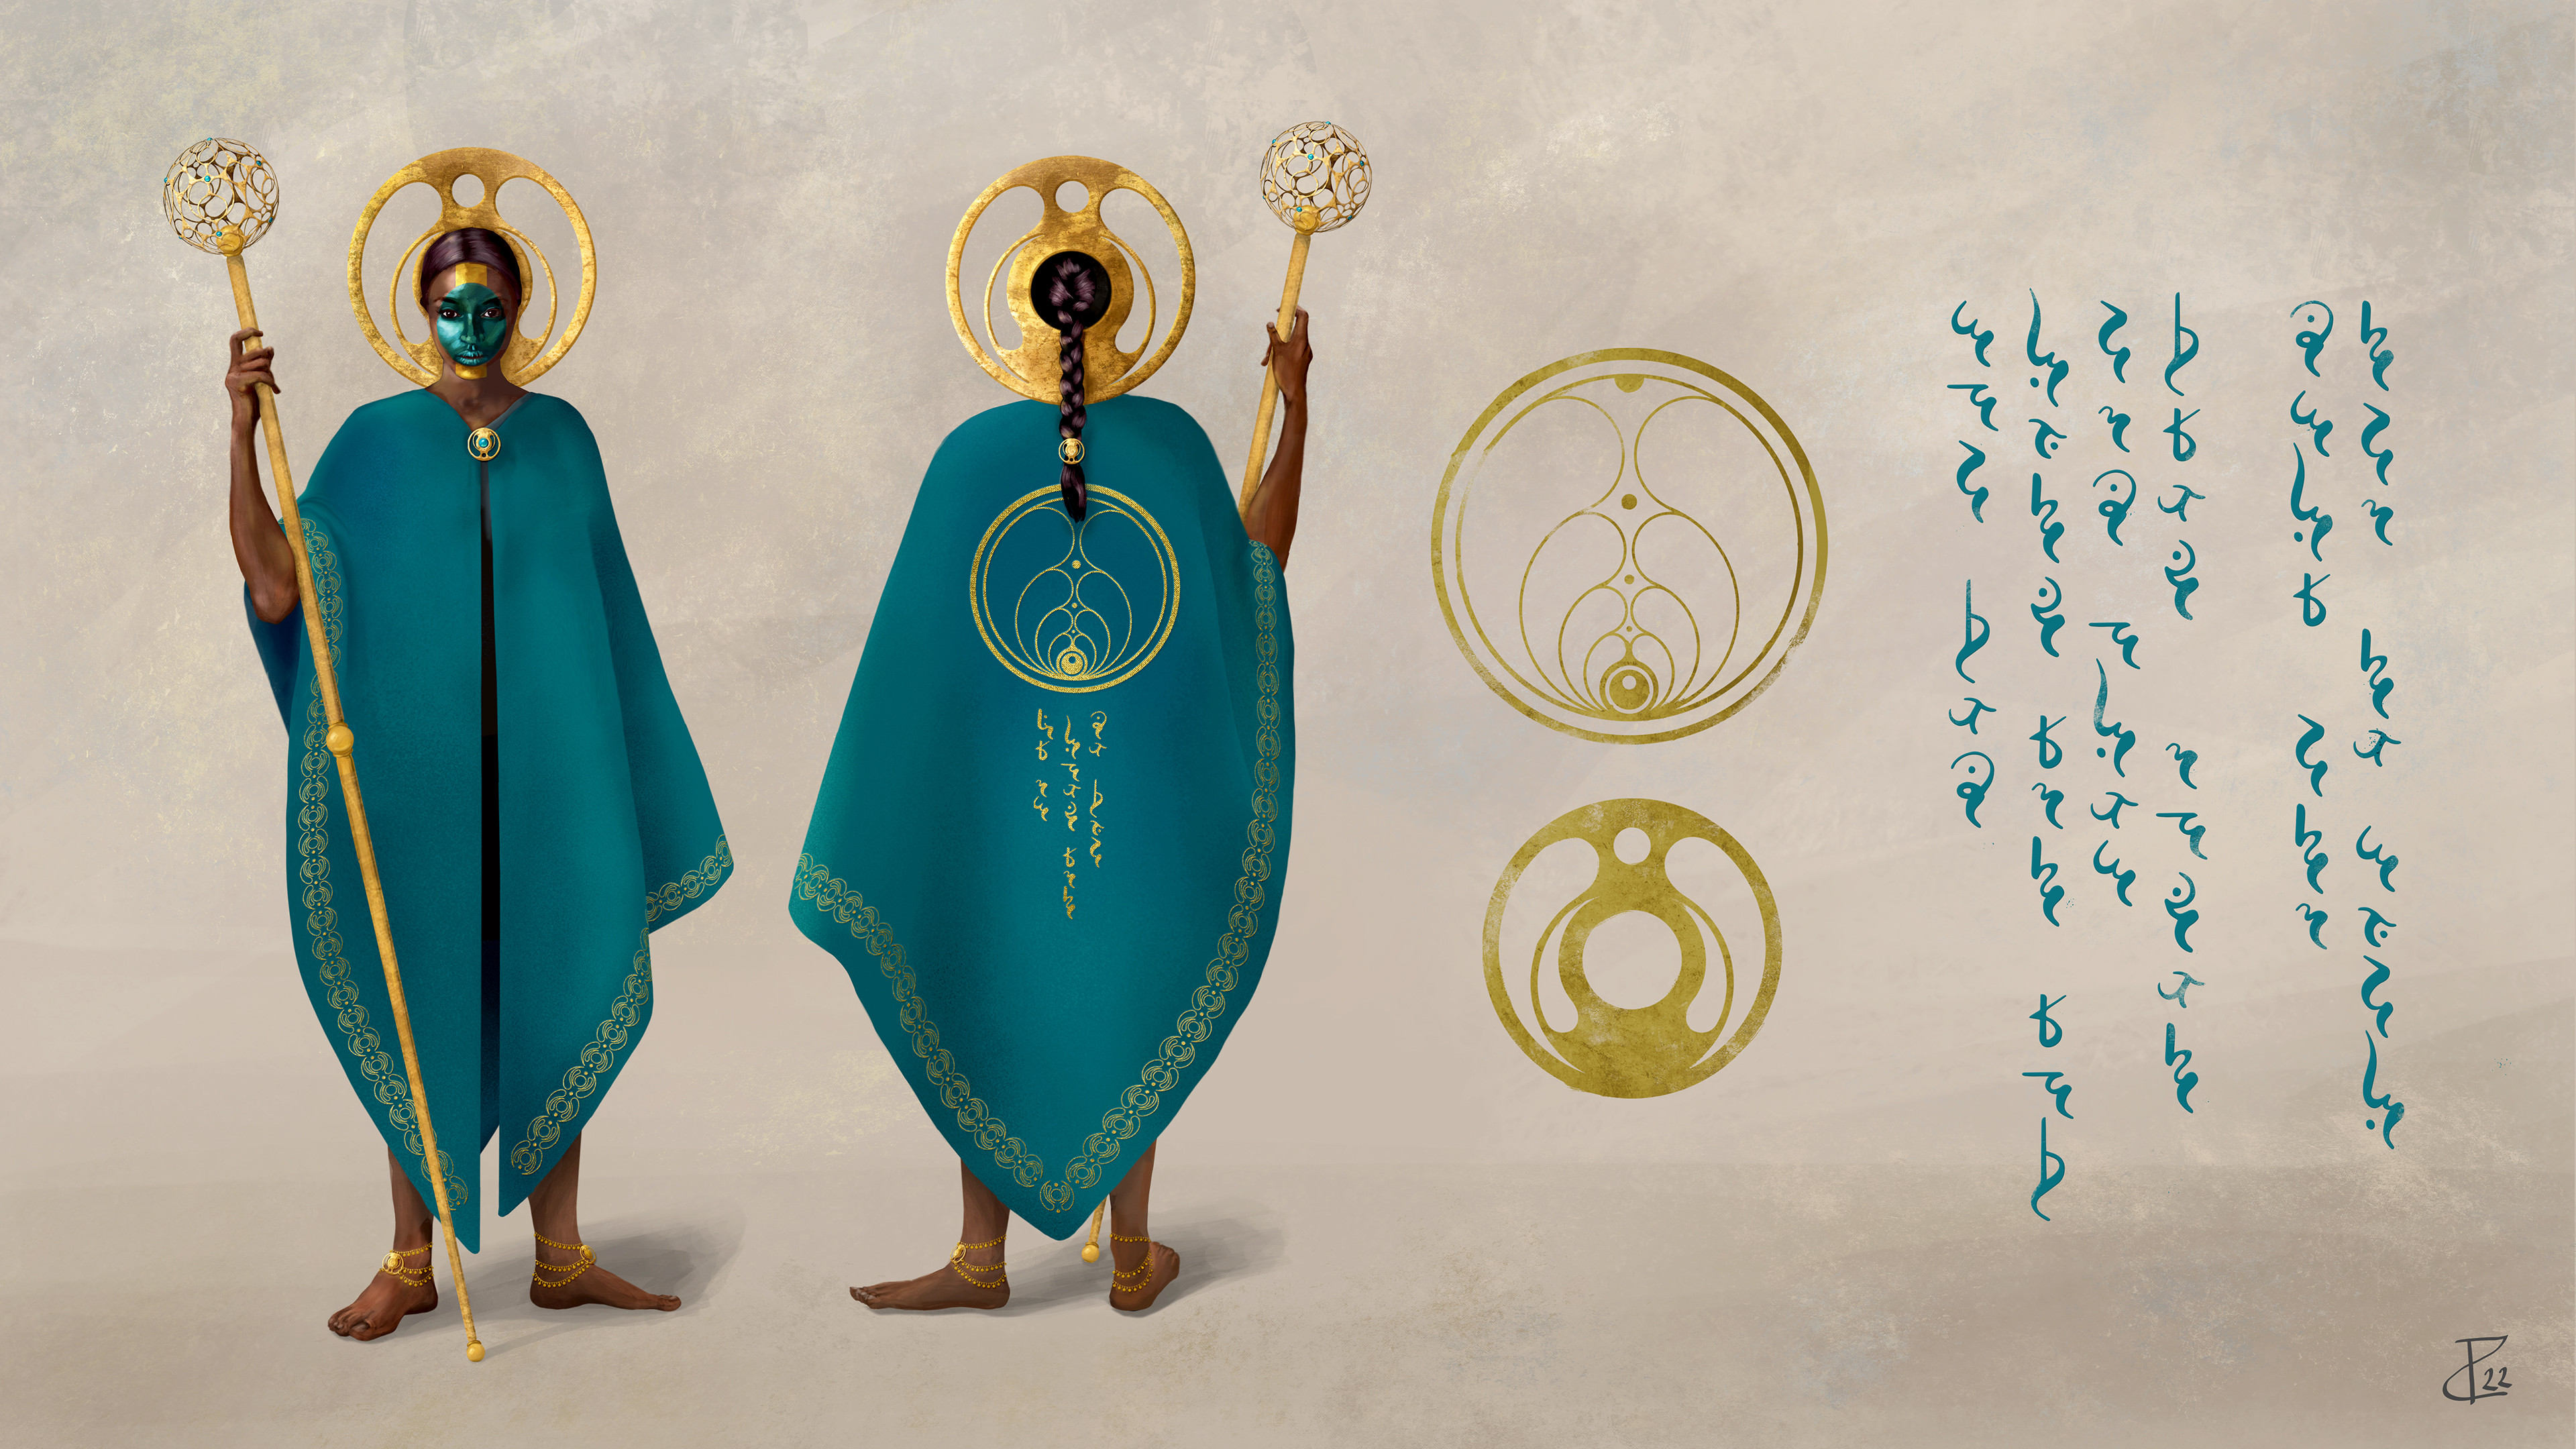 Character Concept with Iconography and Writing System.